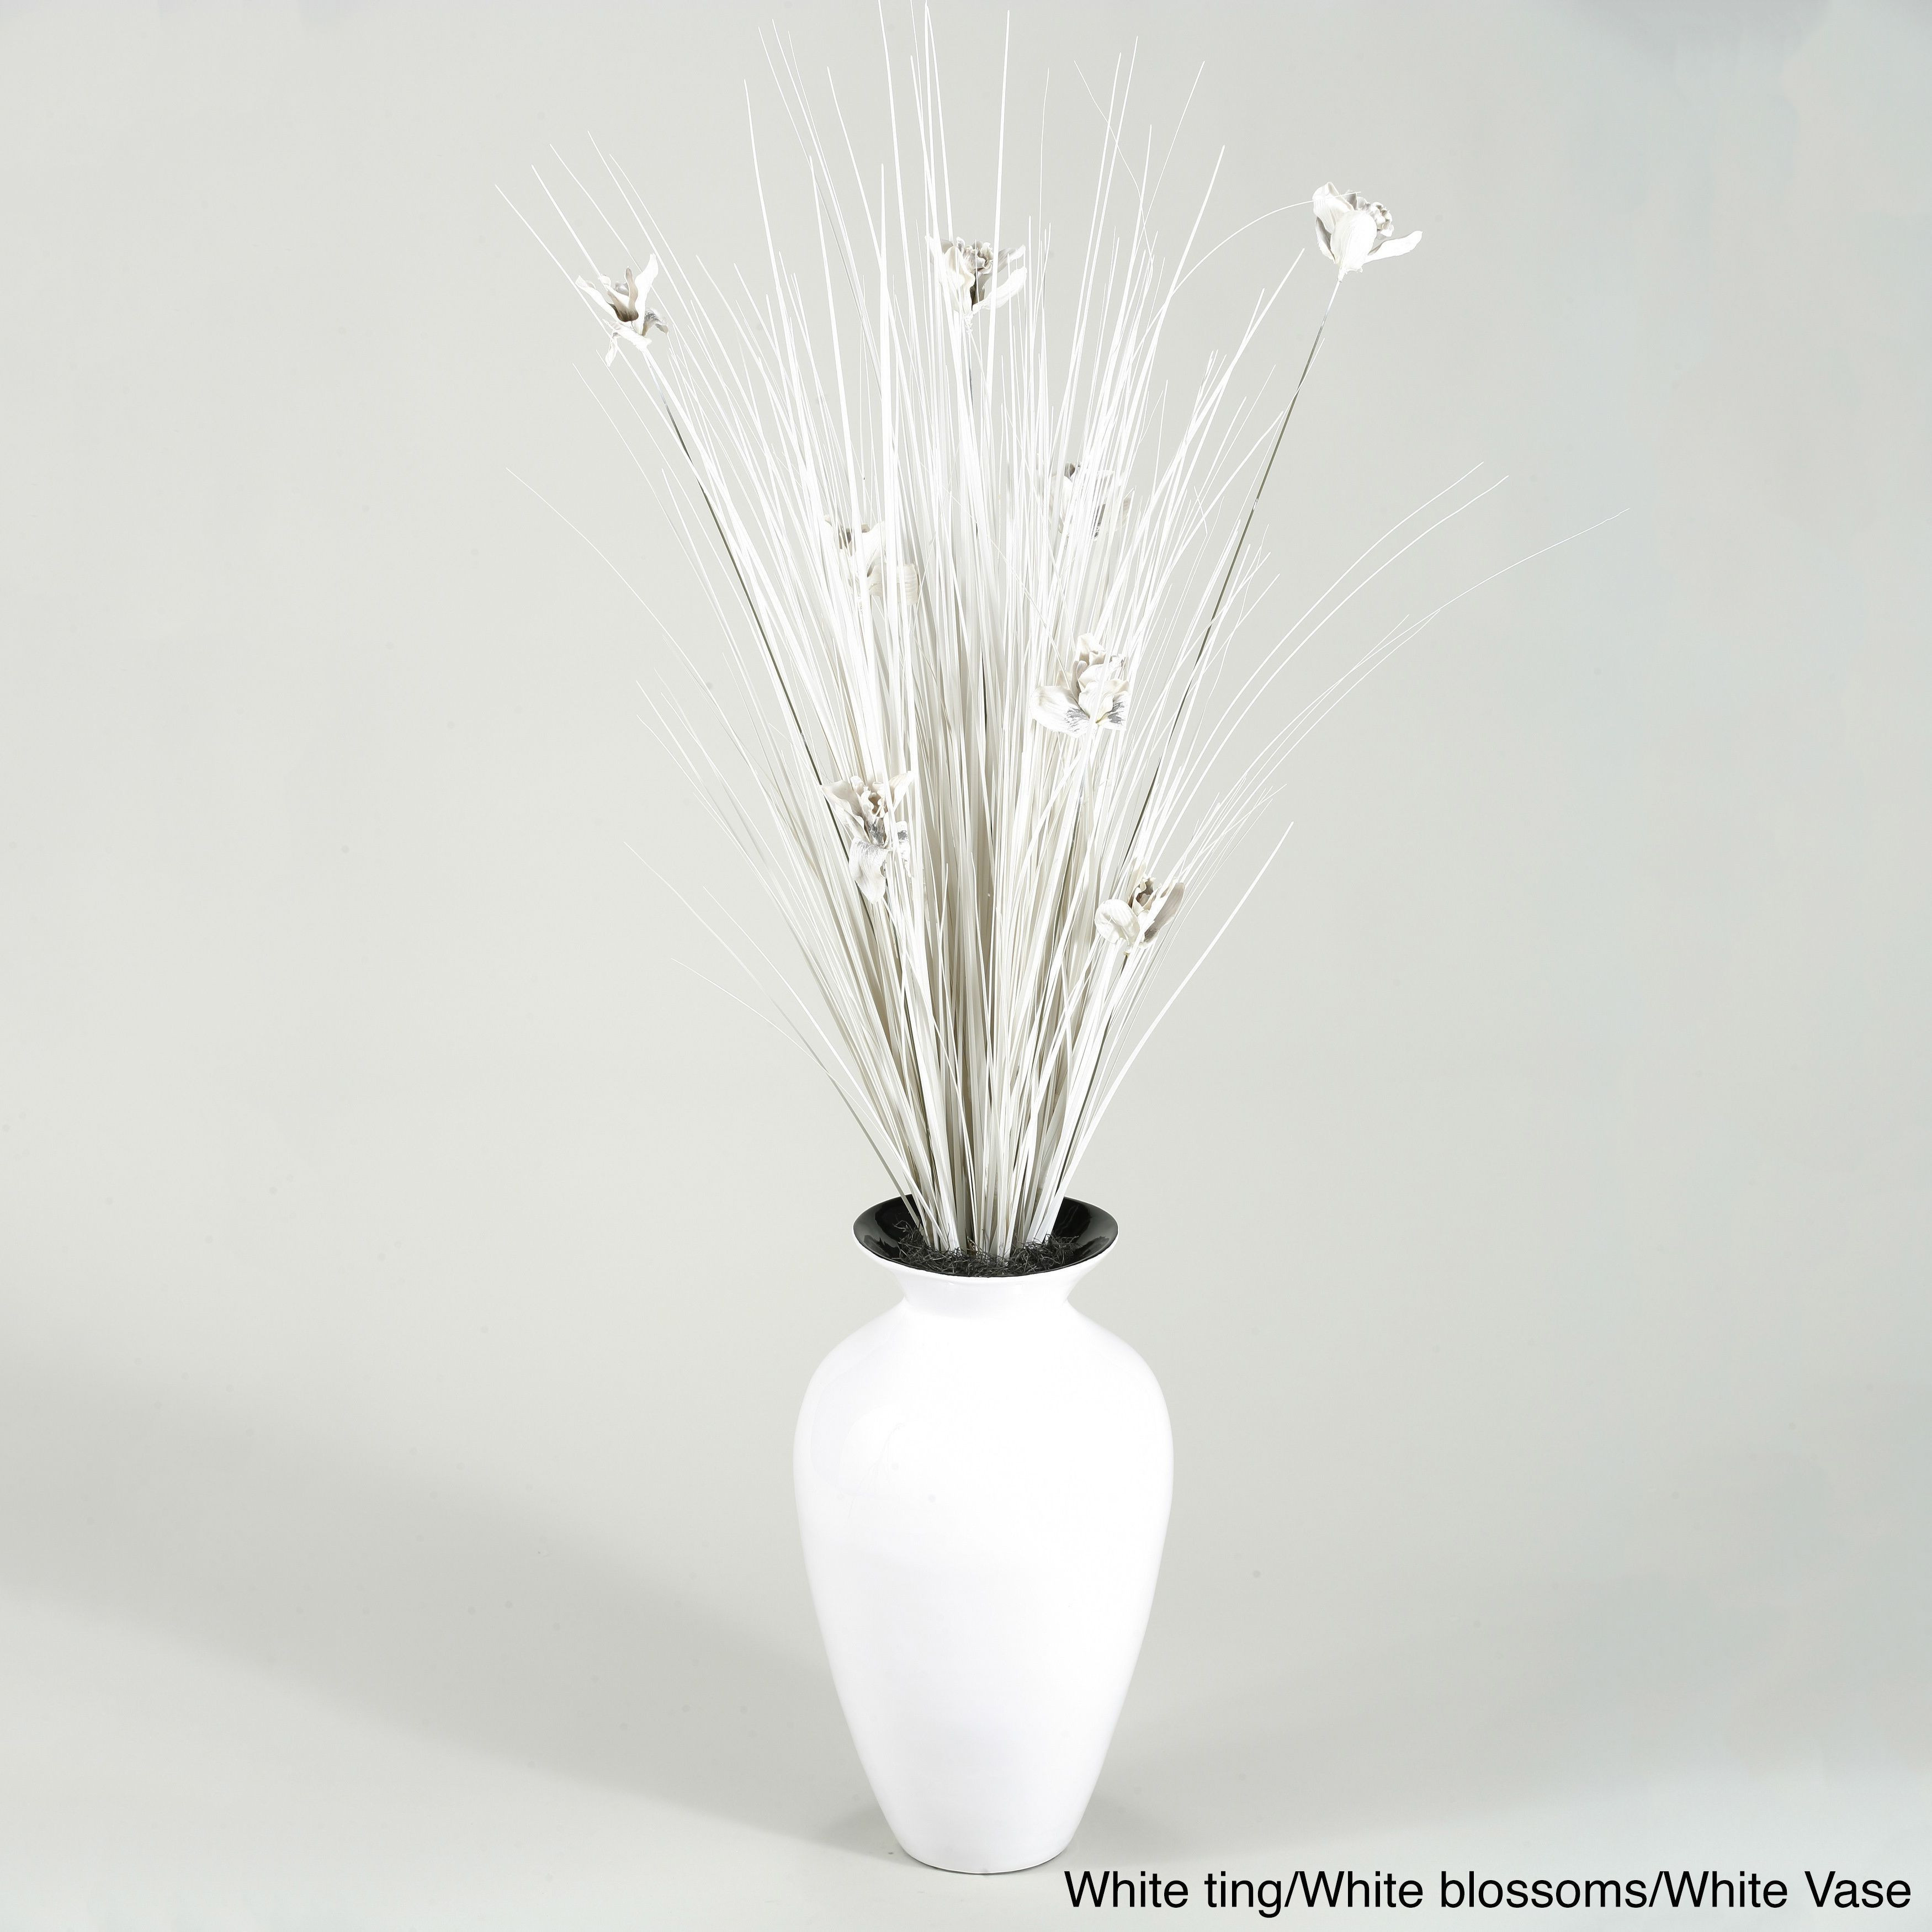 10 Lovely Bohemian Glass Vase 2024 free download bohemian glass vase of black glass vase gallery dw silks blossoms in bamboo vase black pertaining to black glass vase gallery dw silks blossoms in bamboo vase black ting with black blossoms 